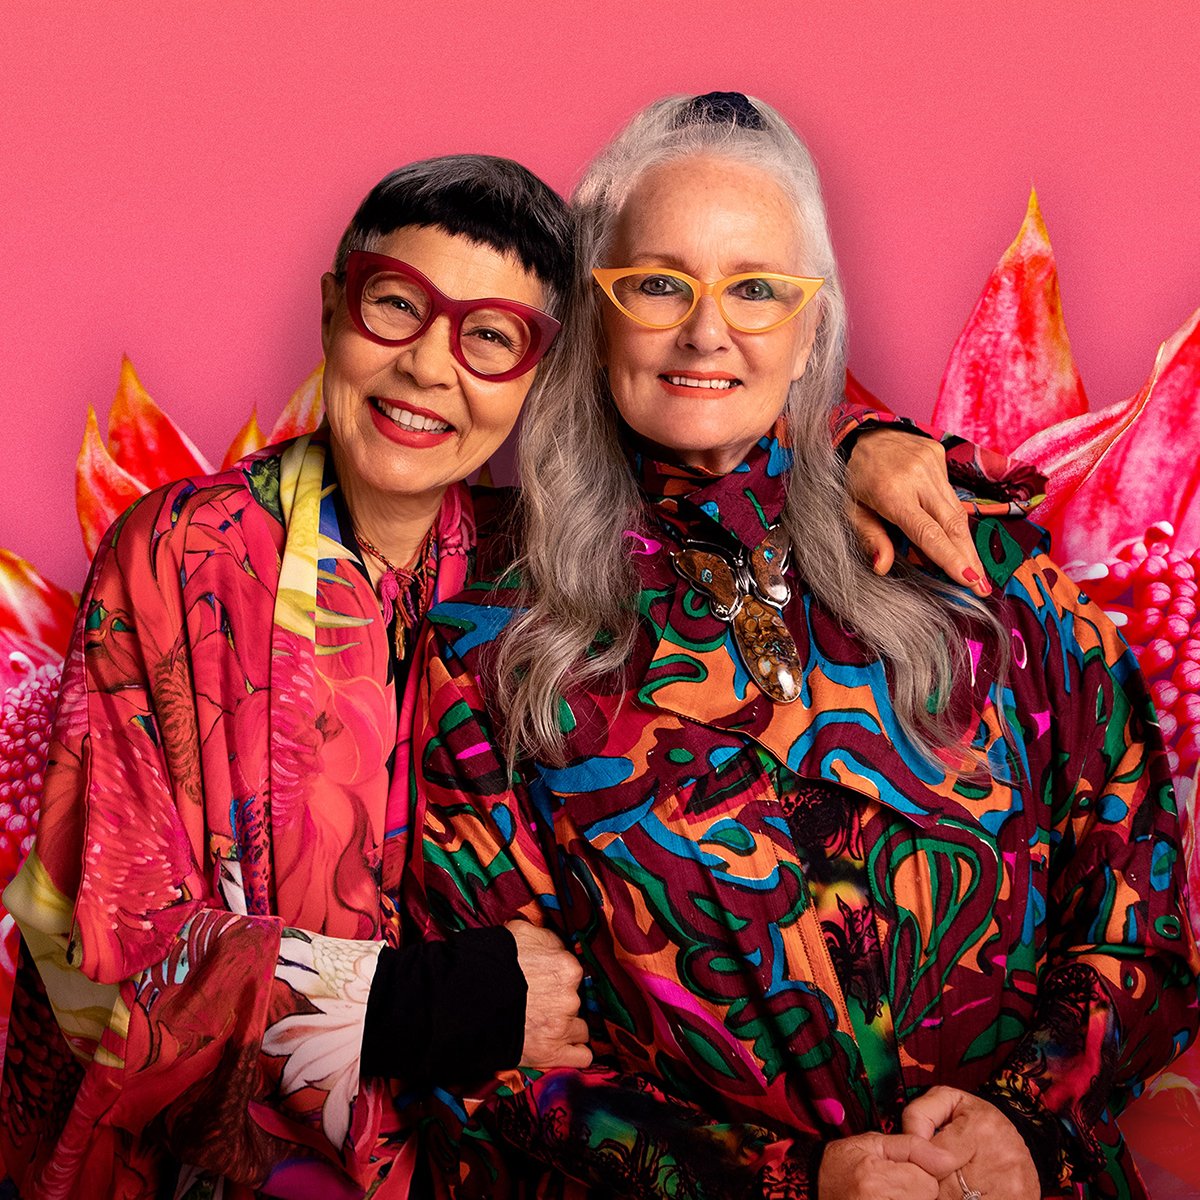 Some partnerships never go out of style. Explore the story behind iconic fashion designers Jenny Kee and Linda Jackson. #StepIntoParadise

Stream from Tuesday 12 October 8.30pm on ABC iview and ABC TV: https://t.co/ClMYciRF3U https://t.co/hsPCXE9EcI